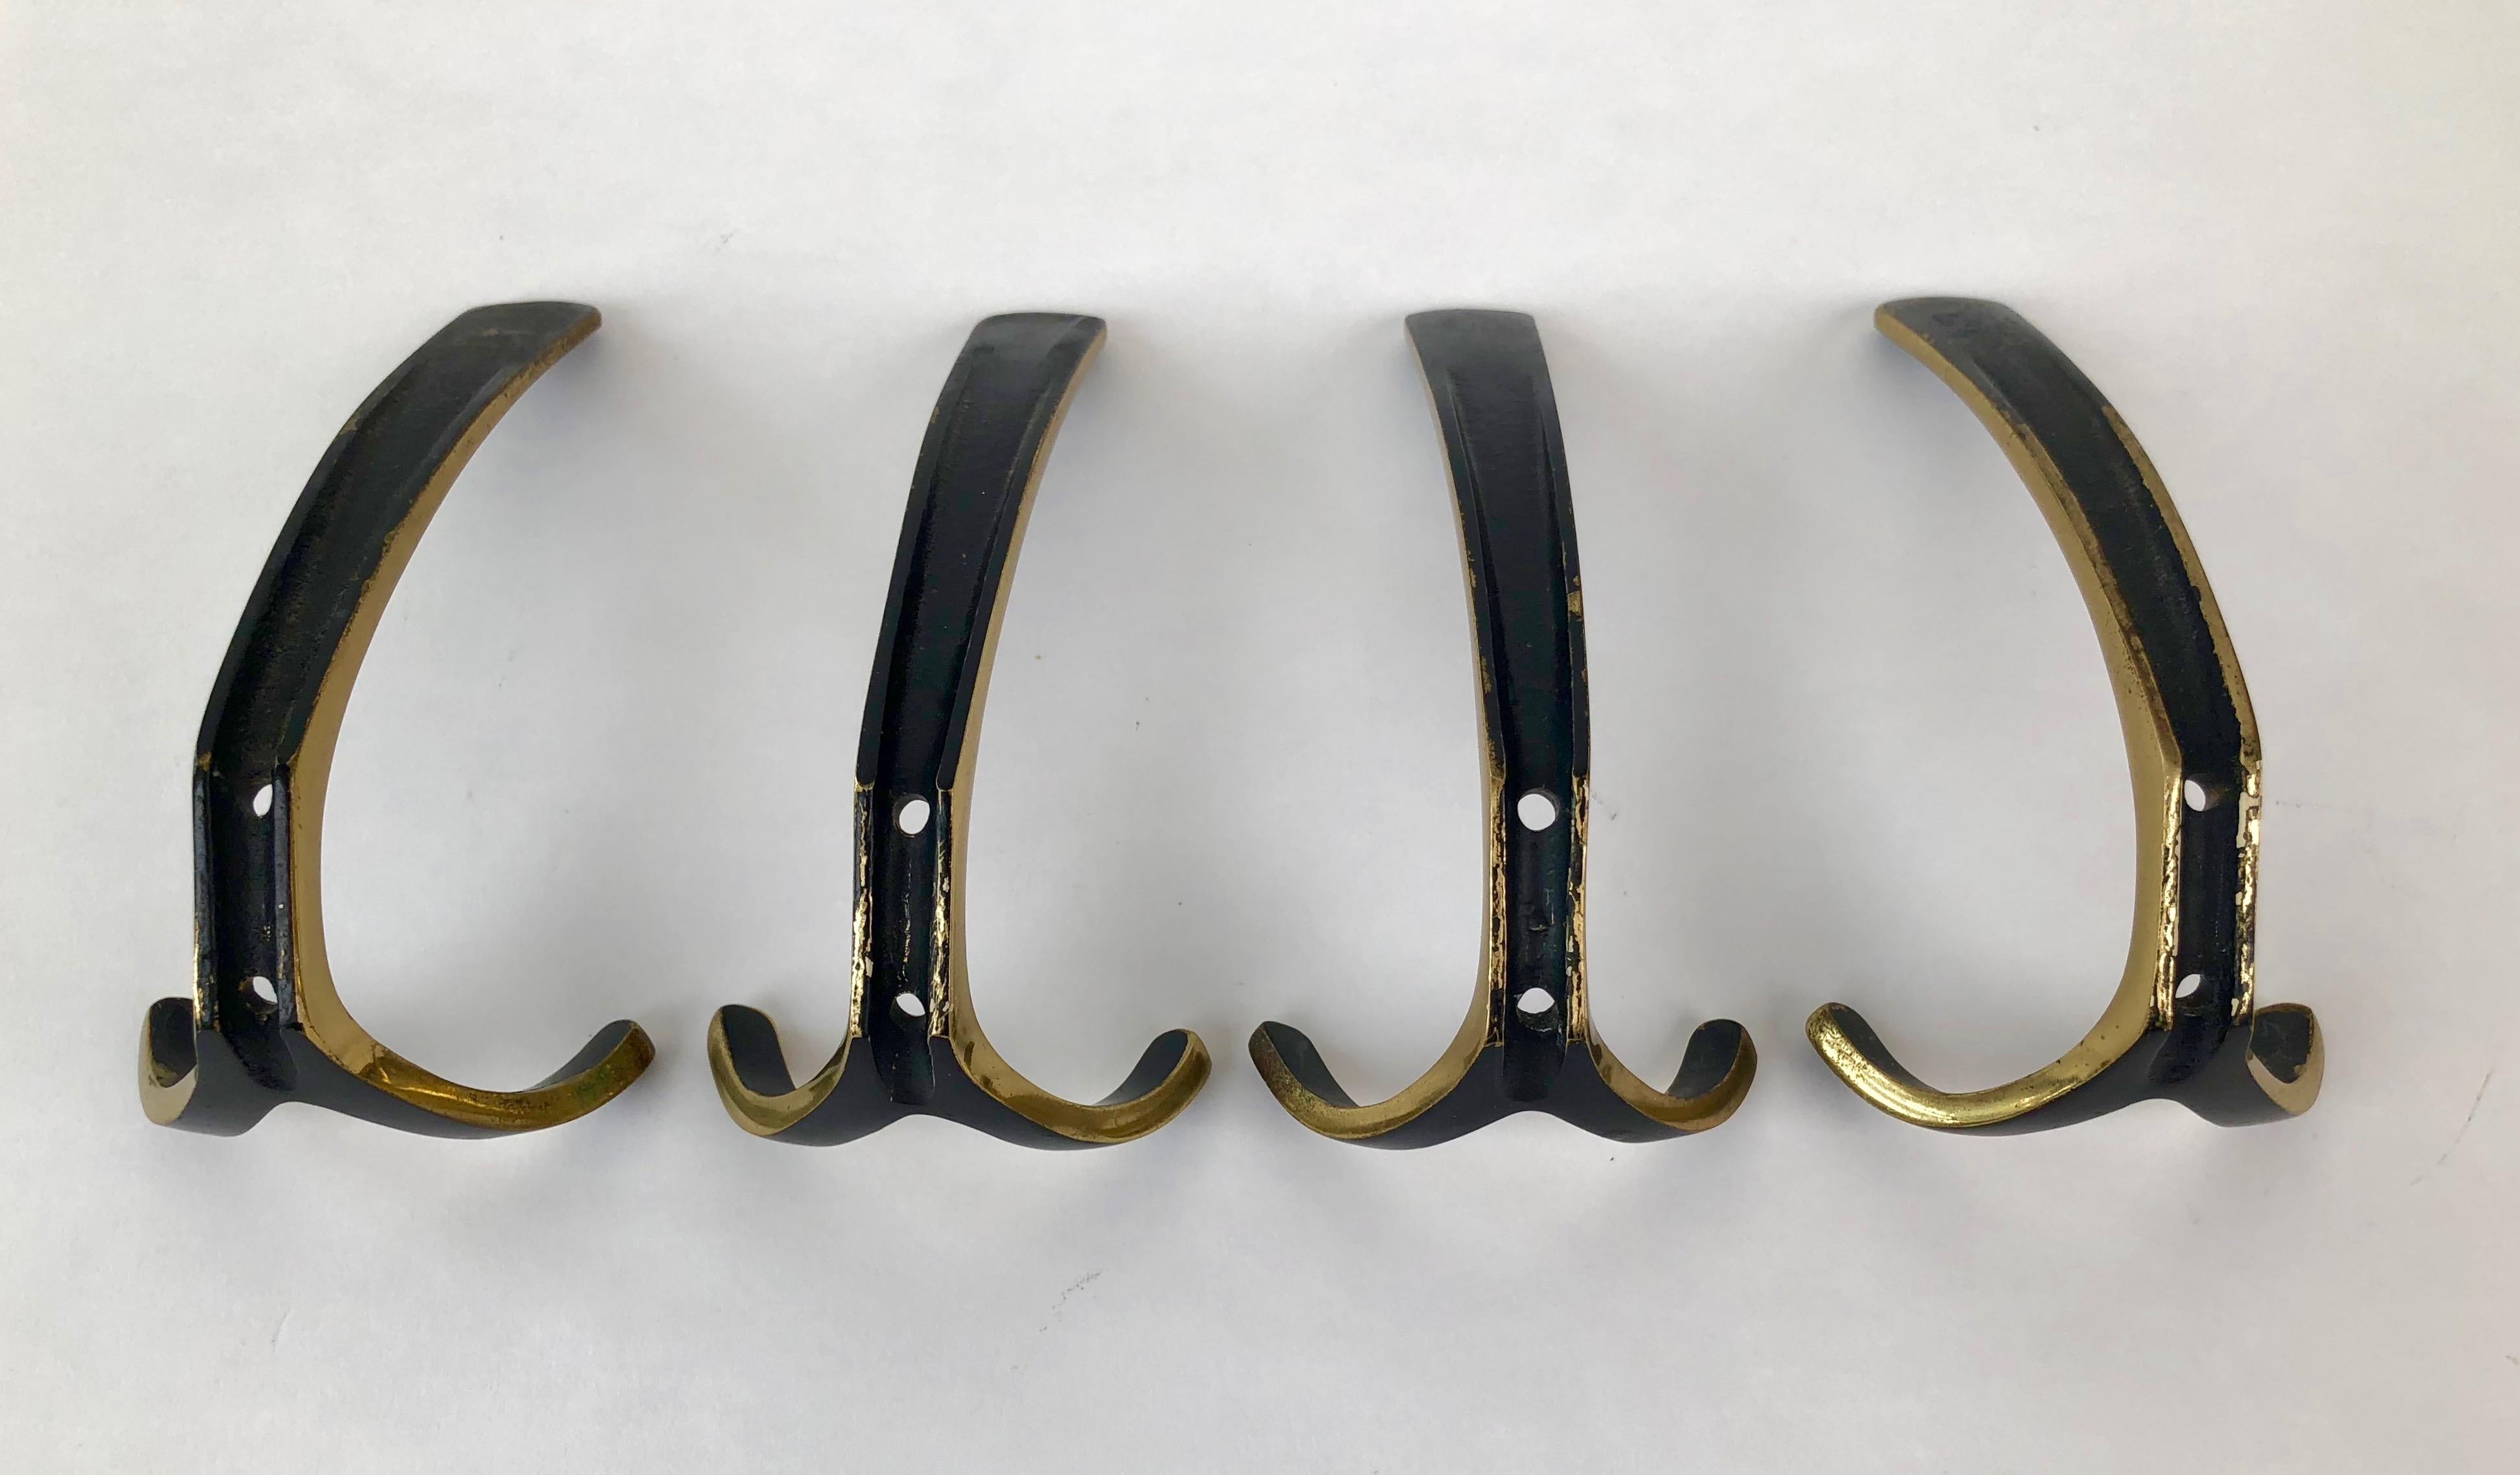 Four Wall-Mounted Brass Hooks by Hertha Baller, Austria, 1950 For Sale 2